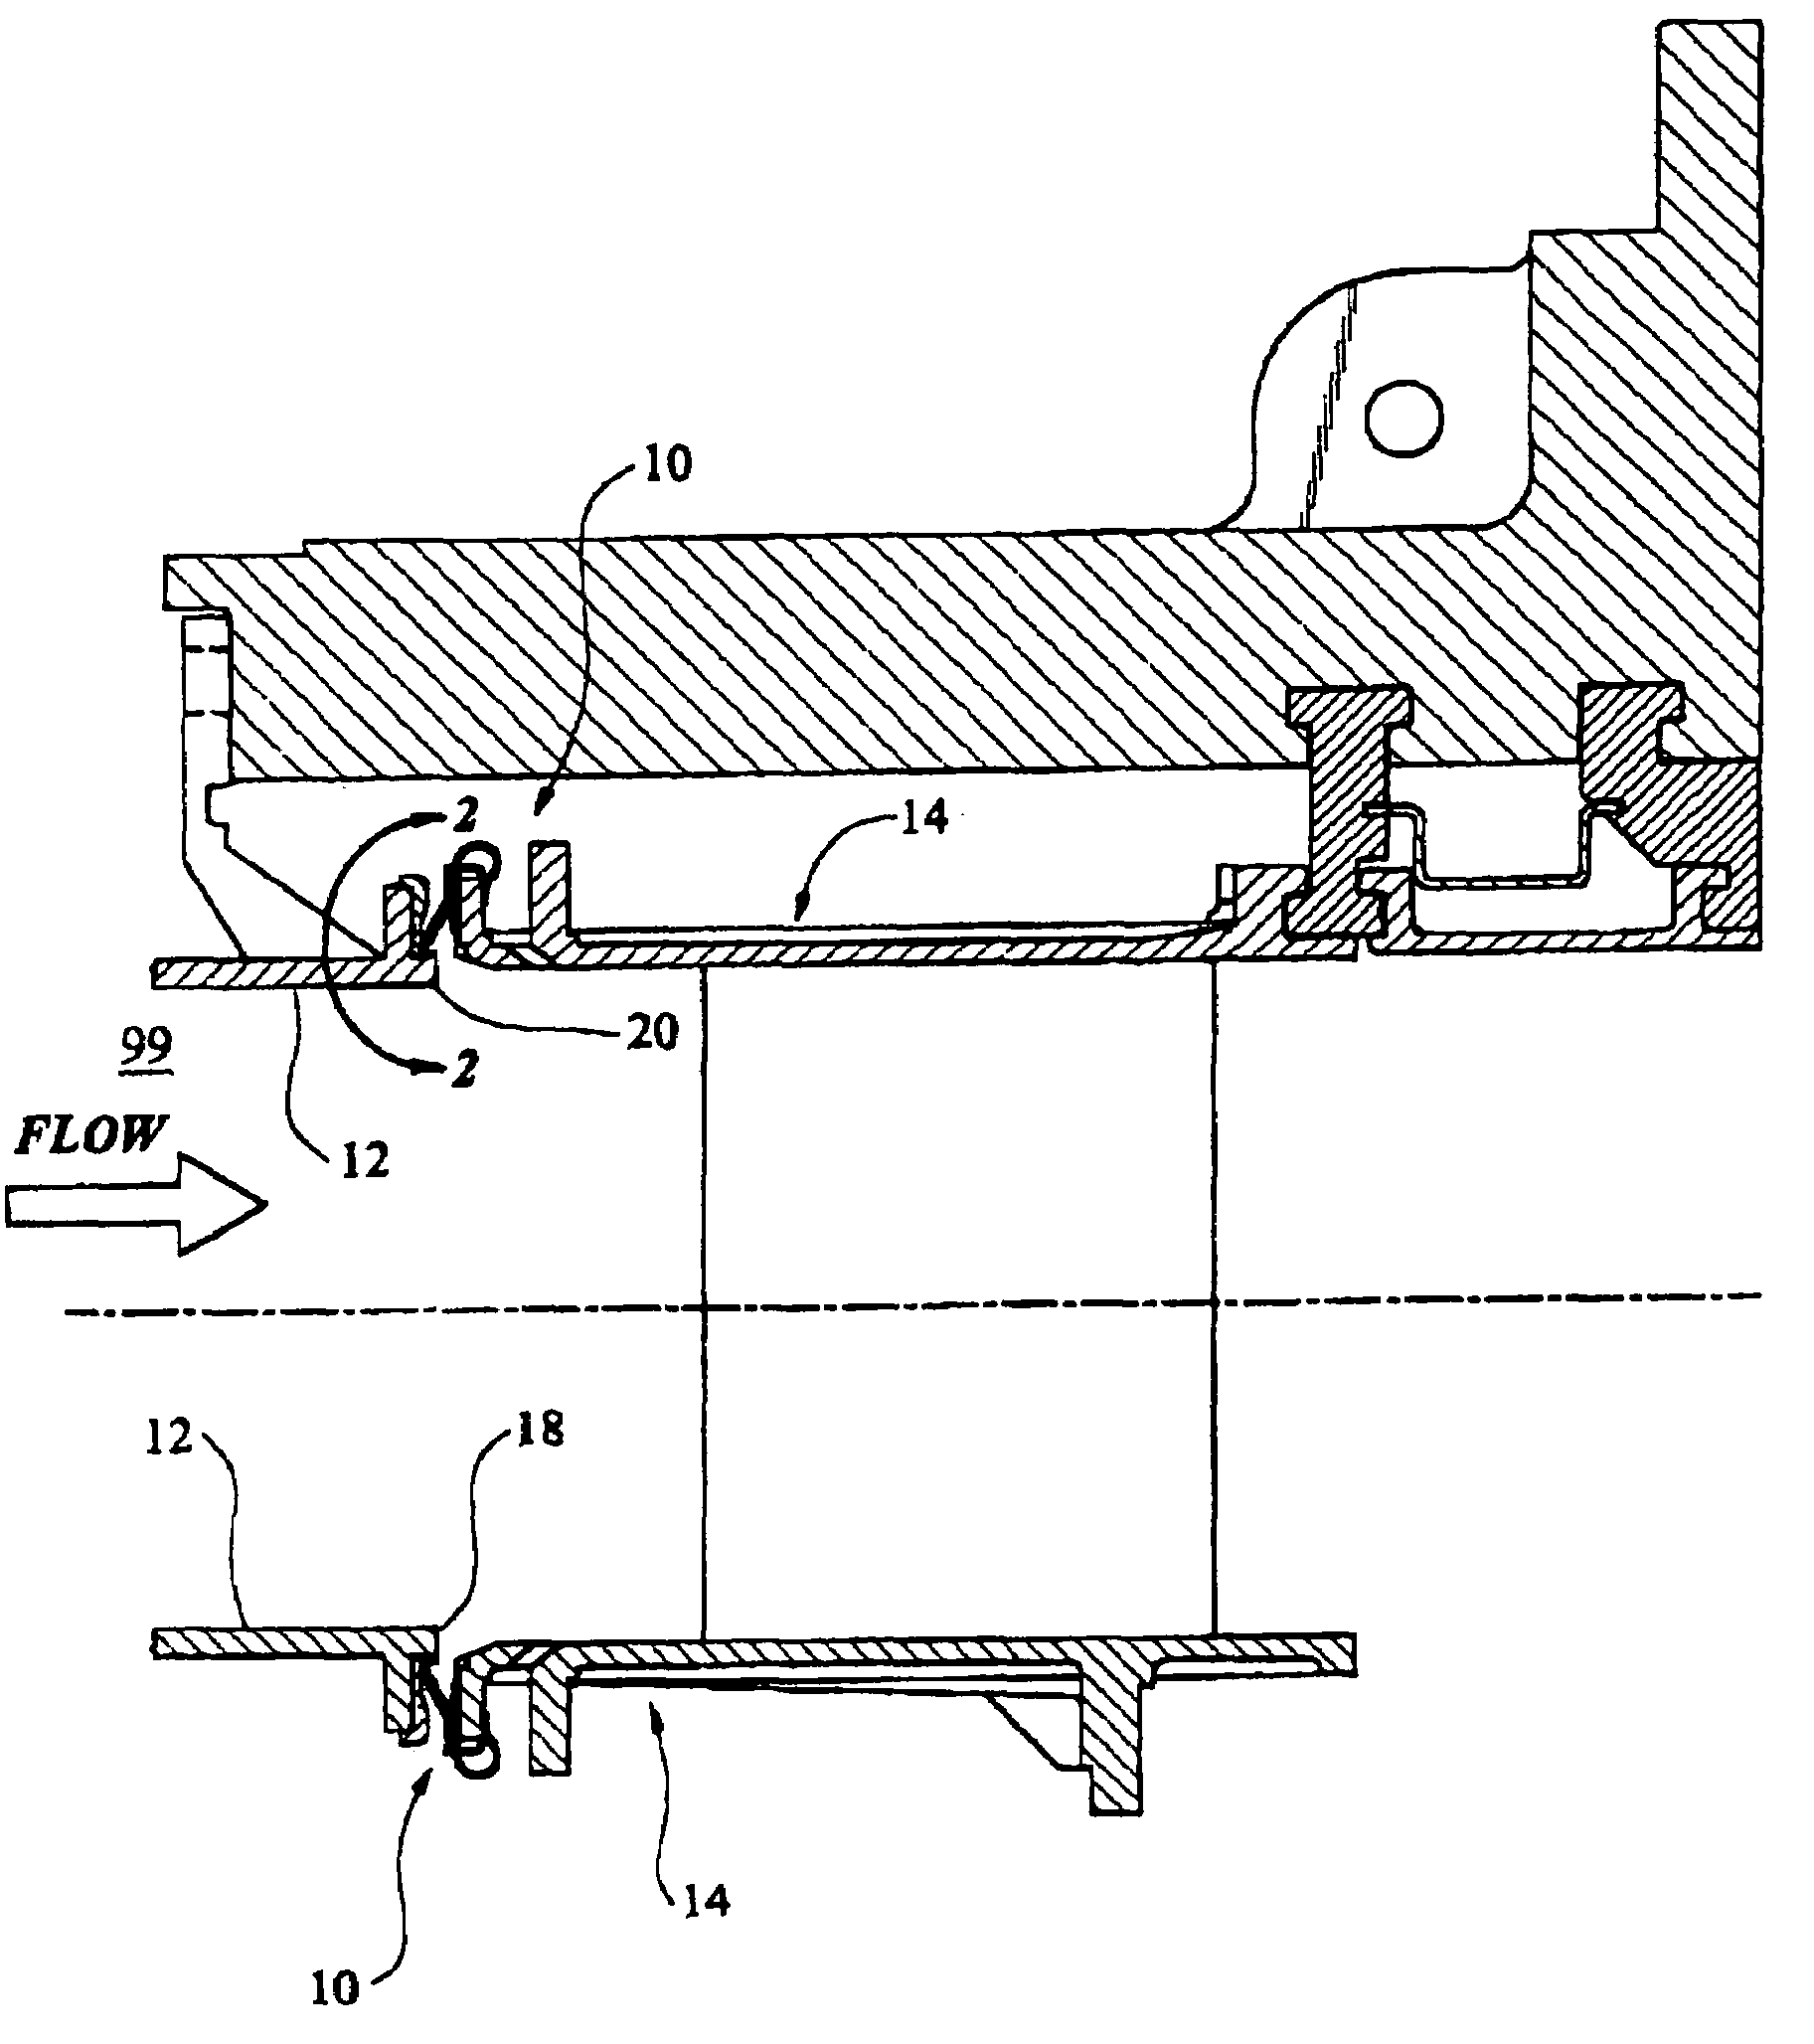 Seal usable between a transition and a turbine vane assembly in a turbine engine